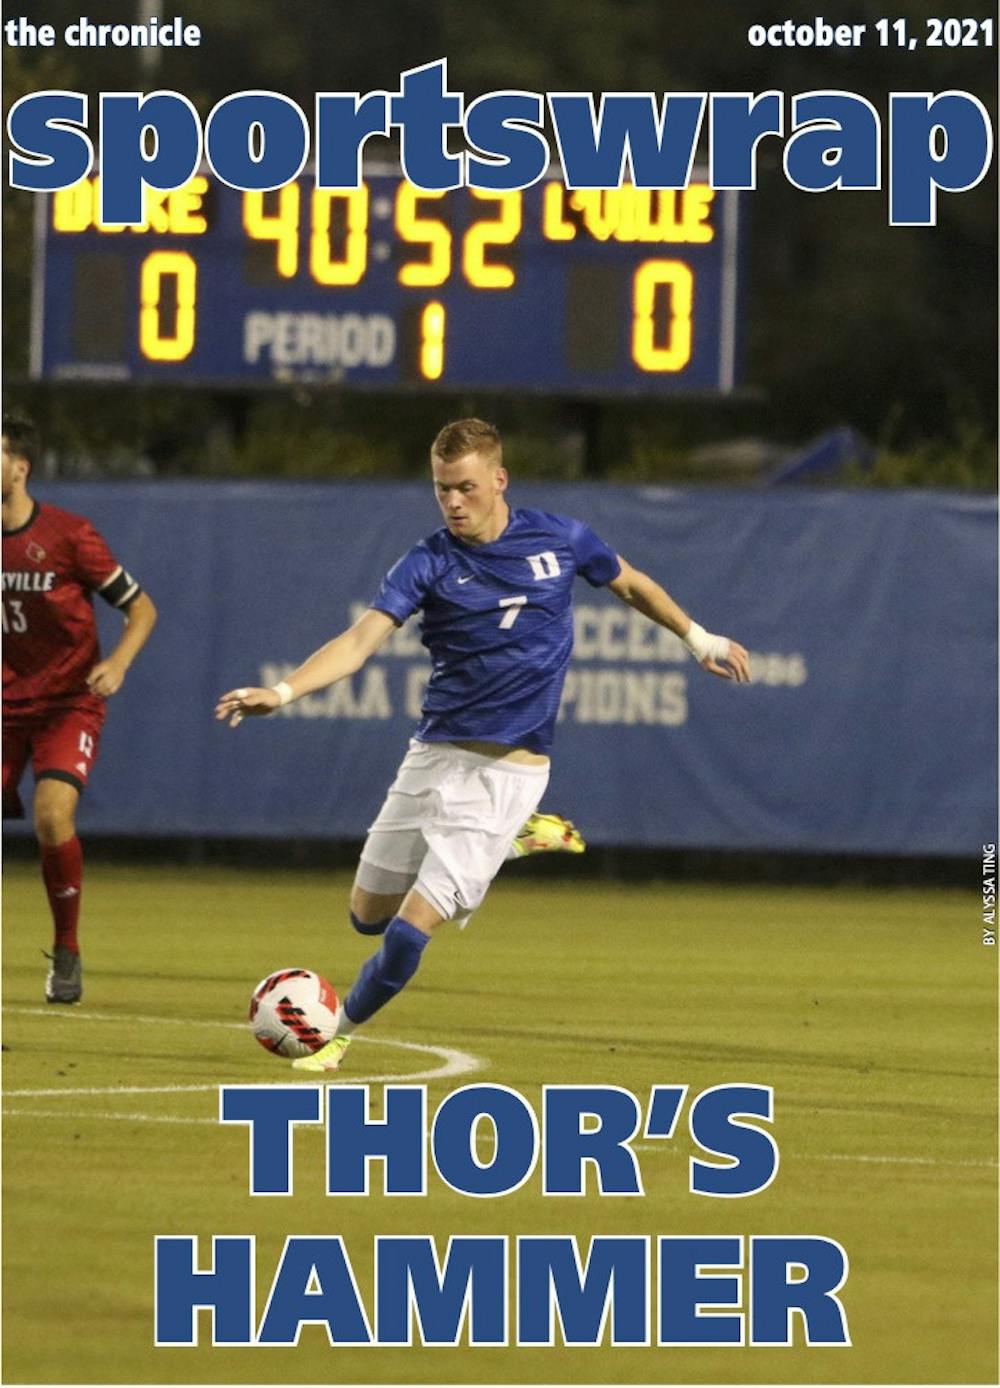 Sophomore Thorleifur Ulfarsson is leading the ACC in goals with nine.